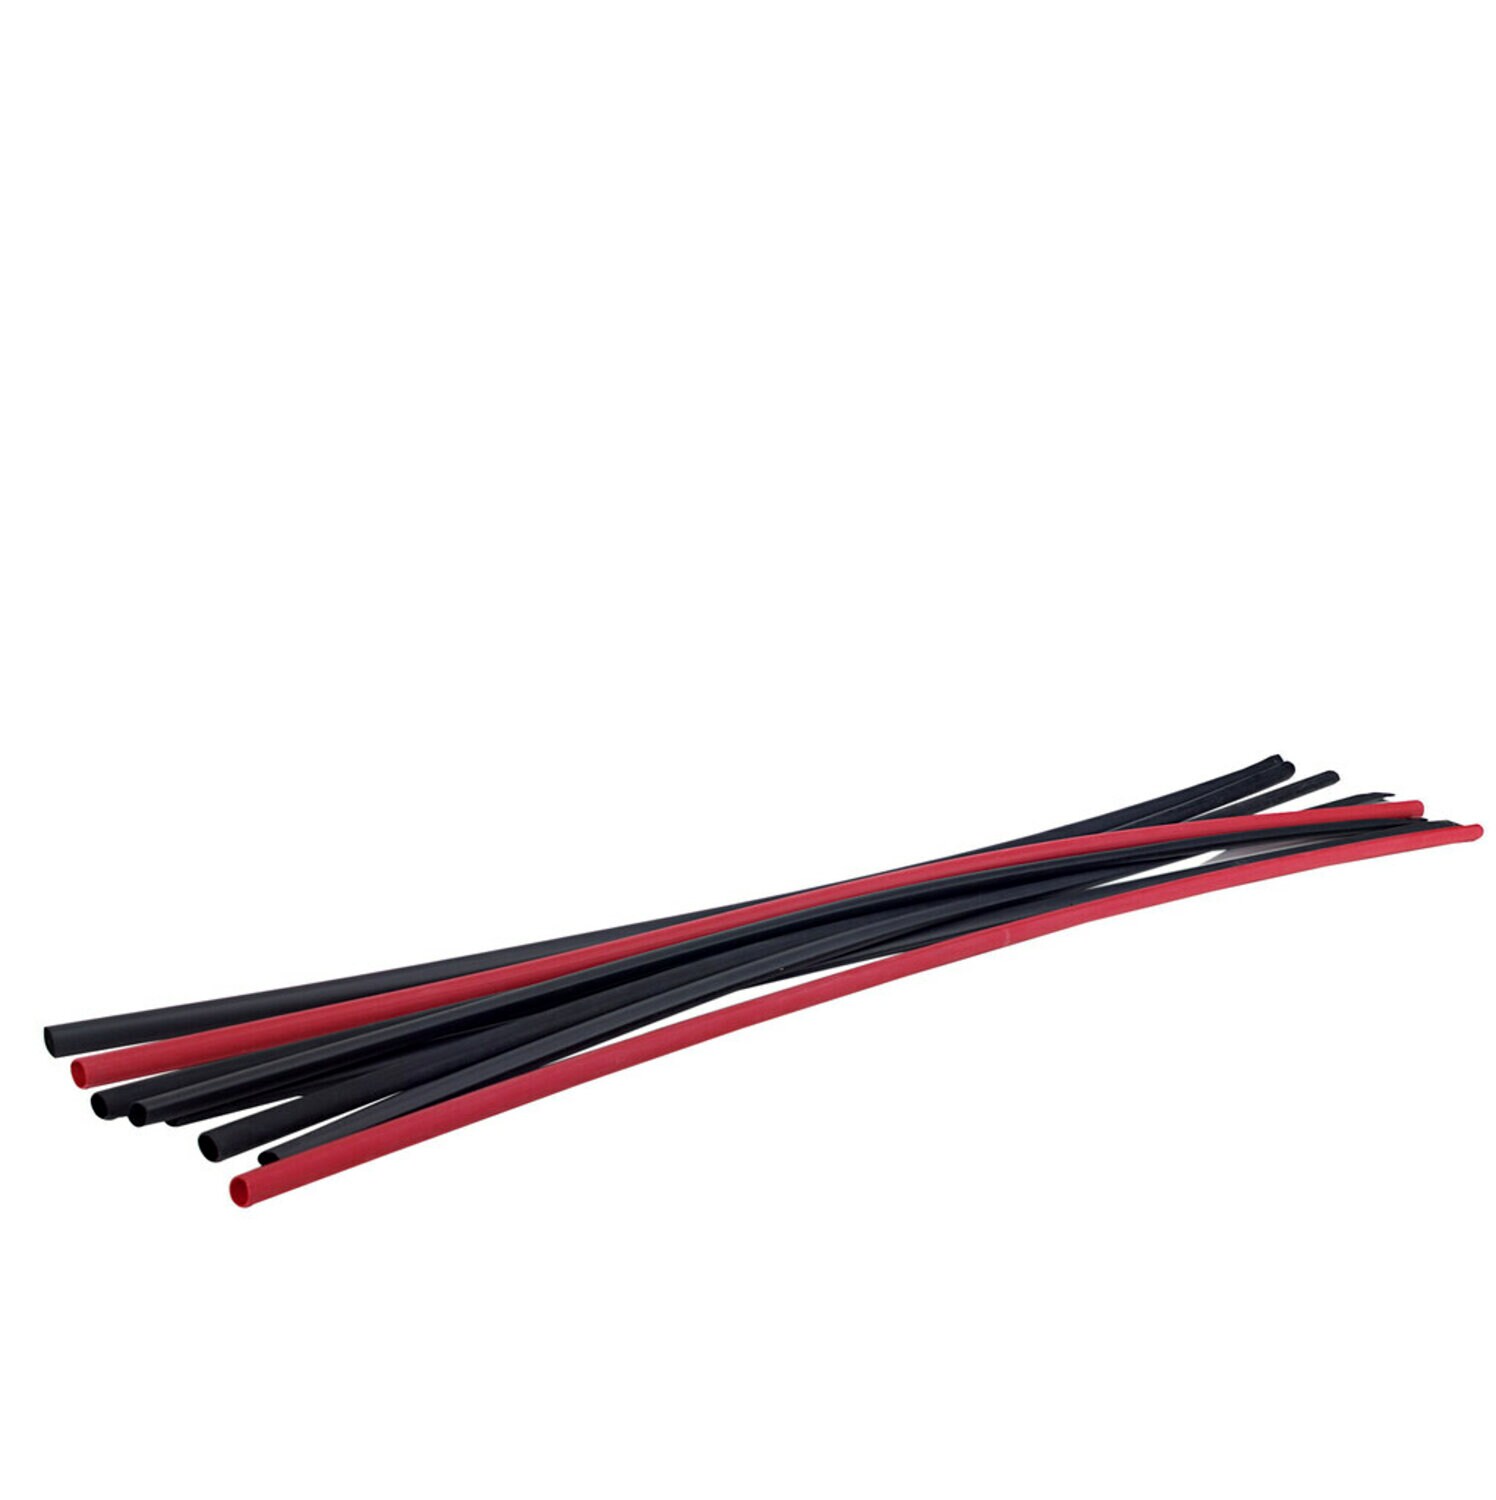 7010400858 - 3M Heat Shrink Thin-Wall Tubing FP-301-2-48"-Red-24 Pcs, 48 in Length
sticks, 24 pieces/case